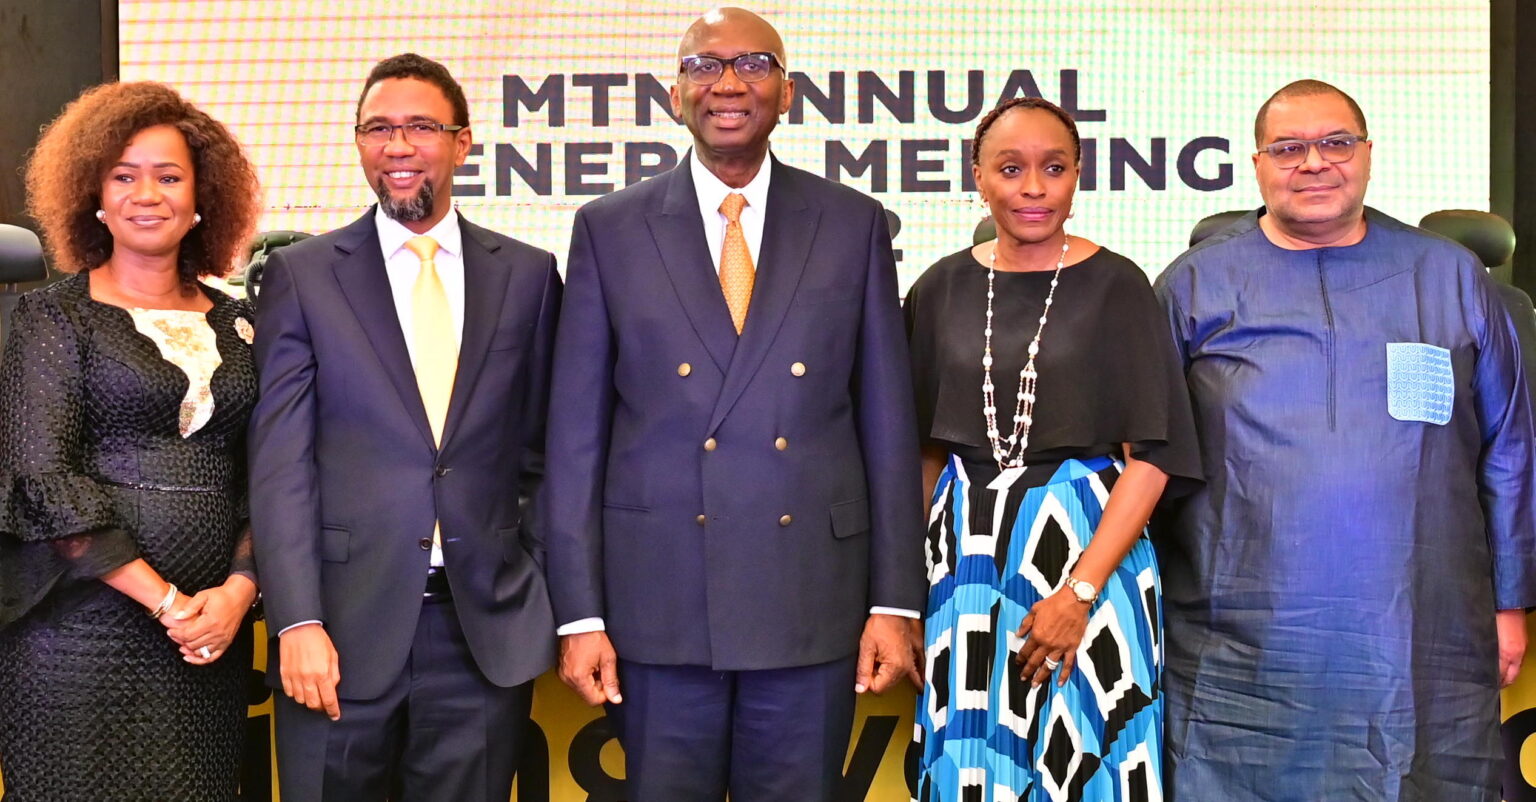 Annual General Meeting Resolutions Of MTN Nigeria